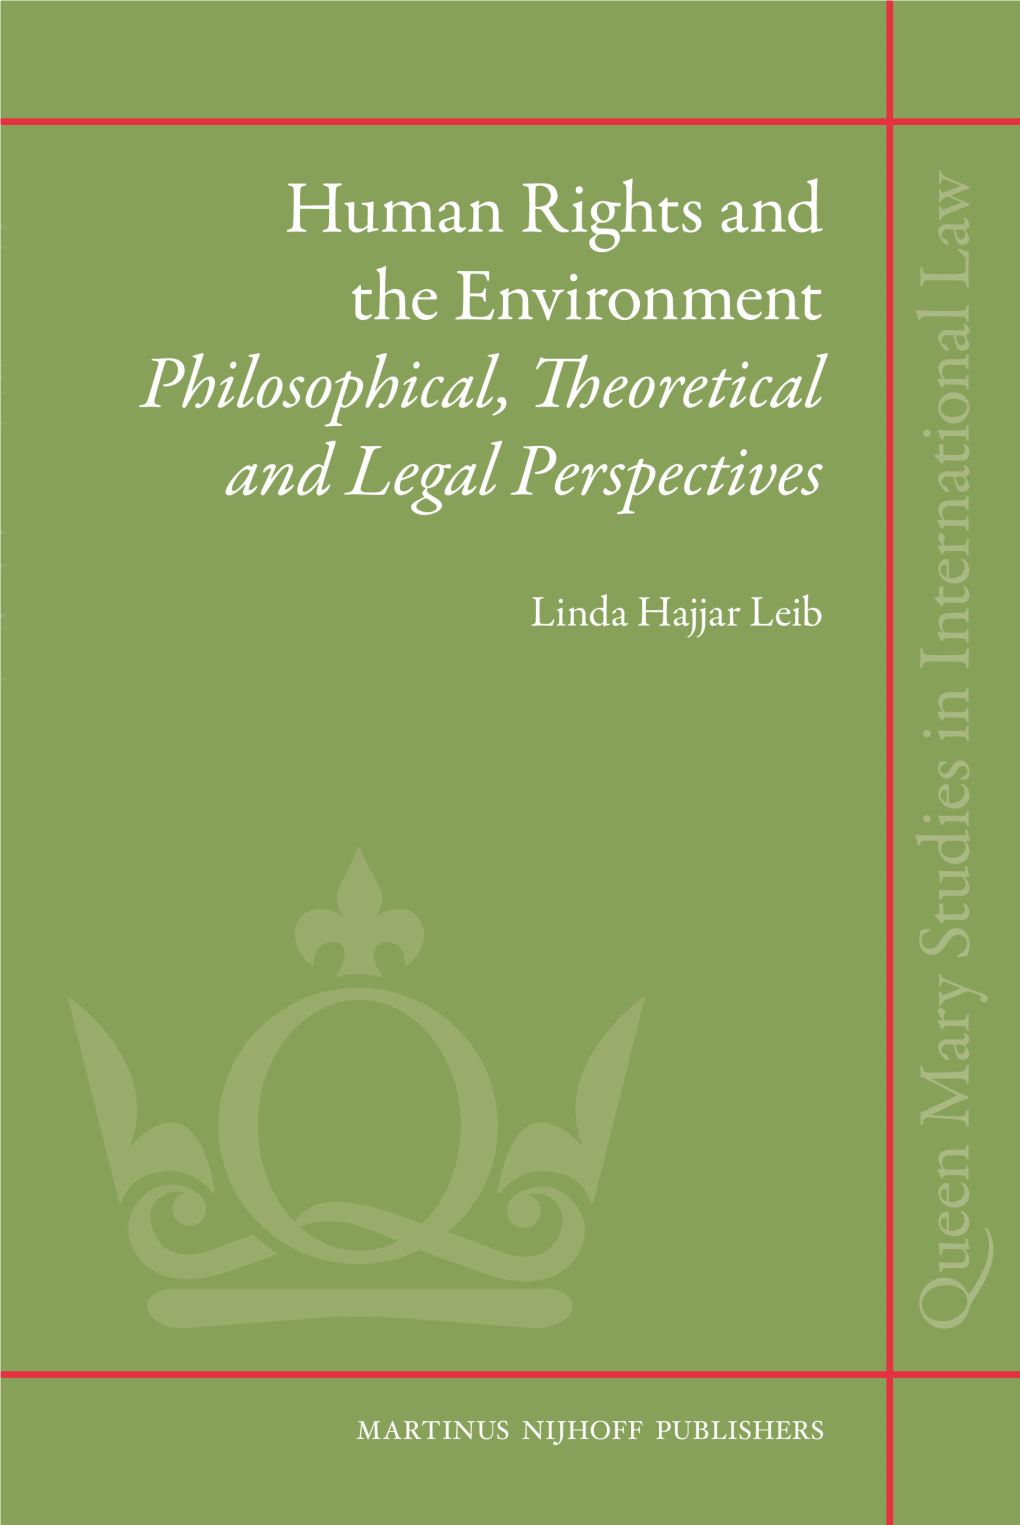 Human Rights and the Environment Queen Mary Studies in International Law